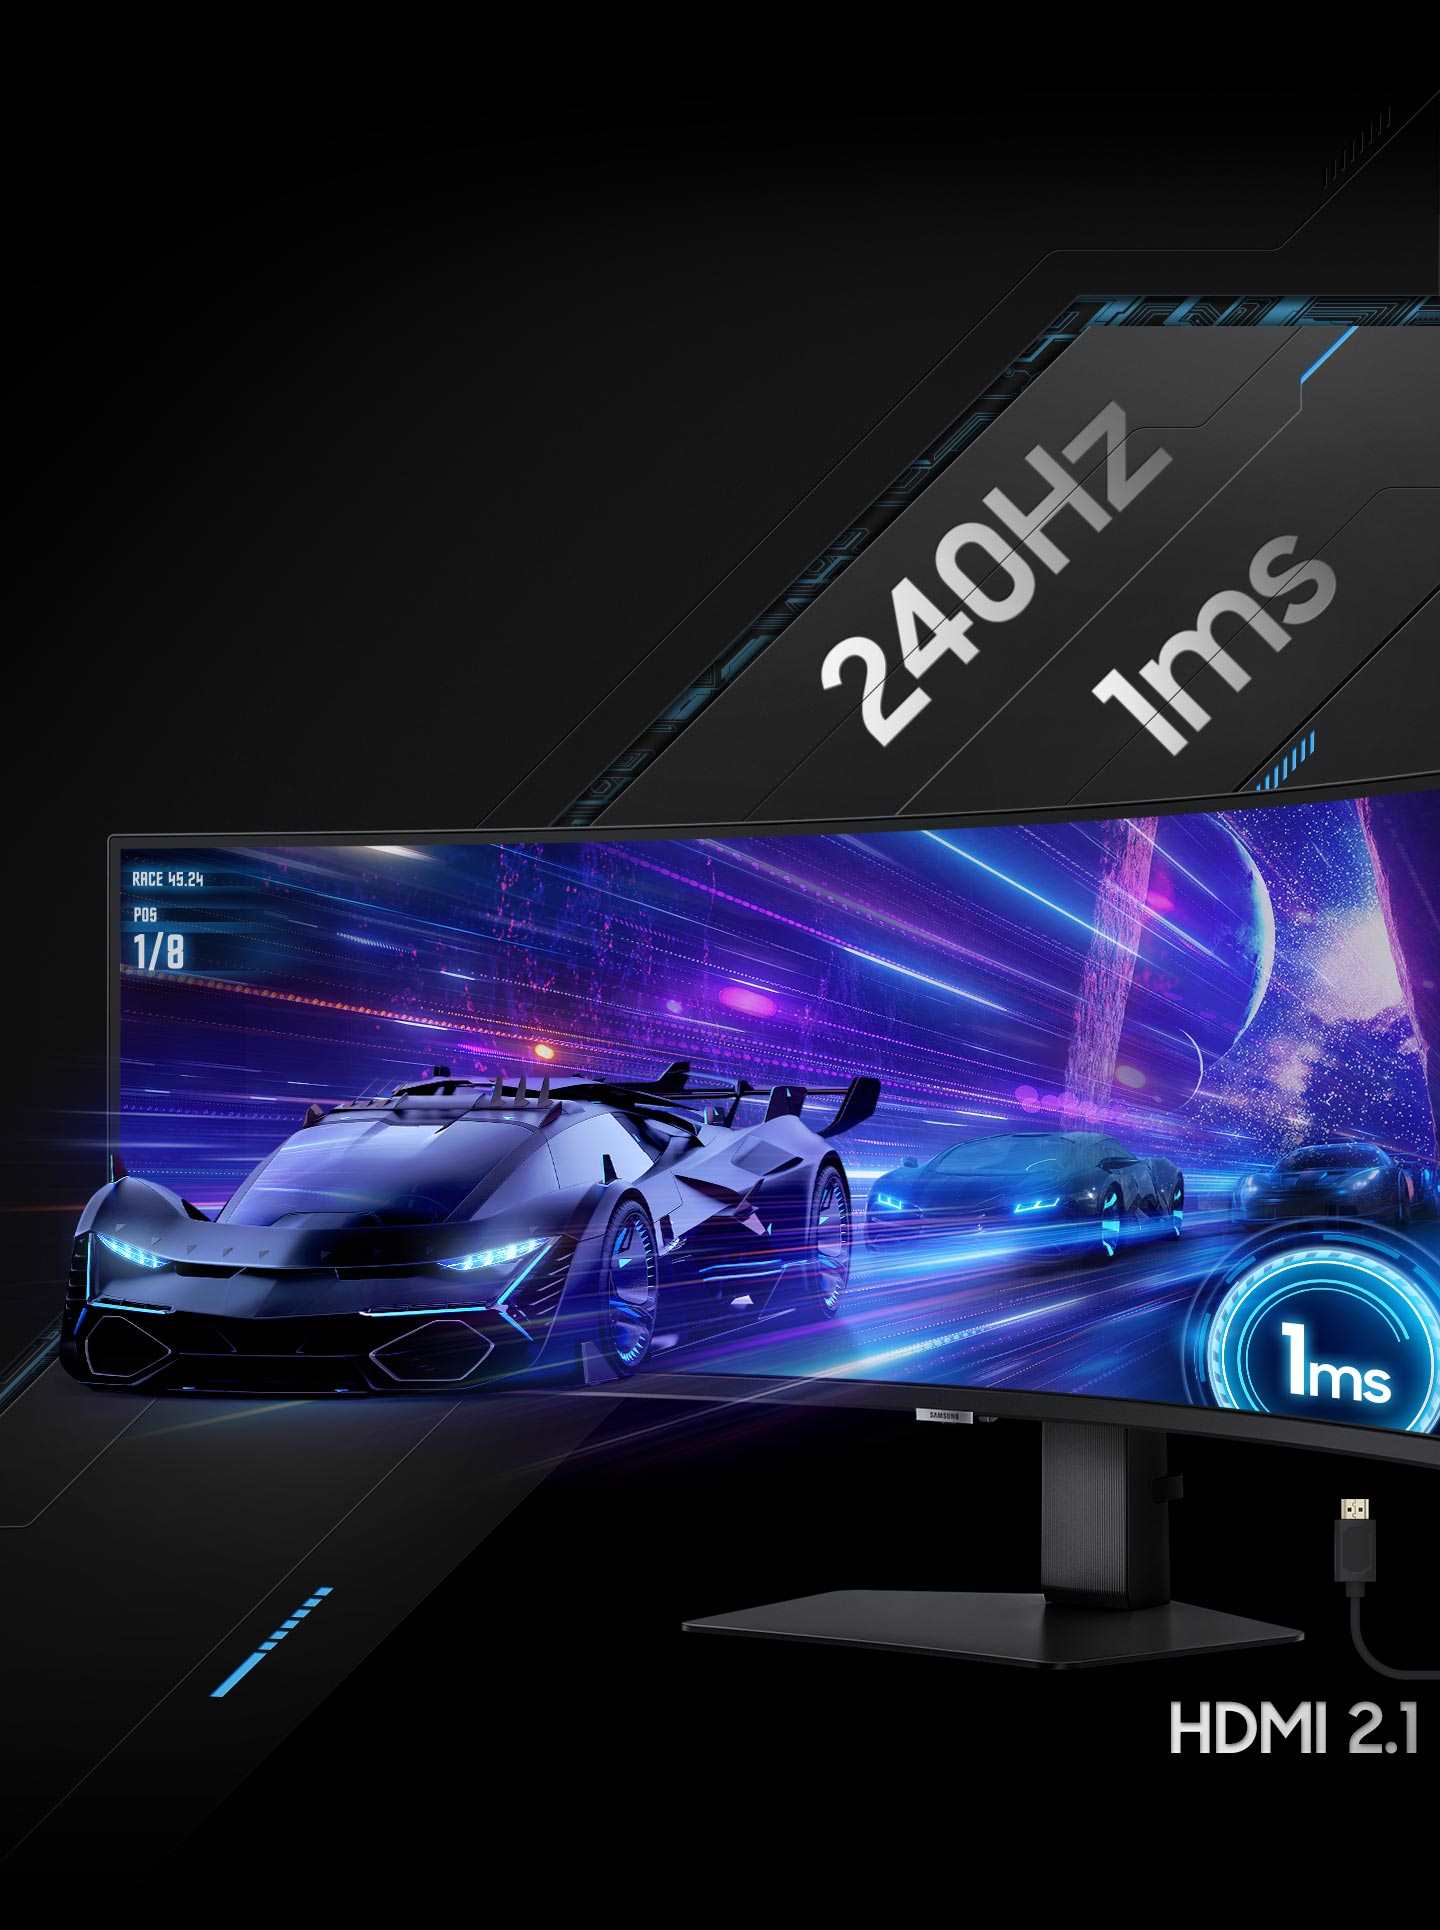 Rapid 240Hz refresh rate and lightning fast 1ms response time